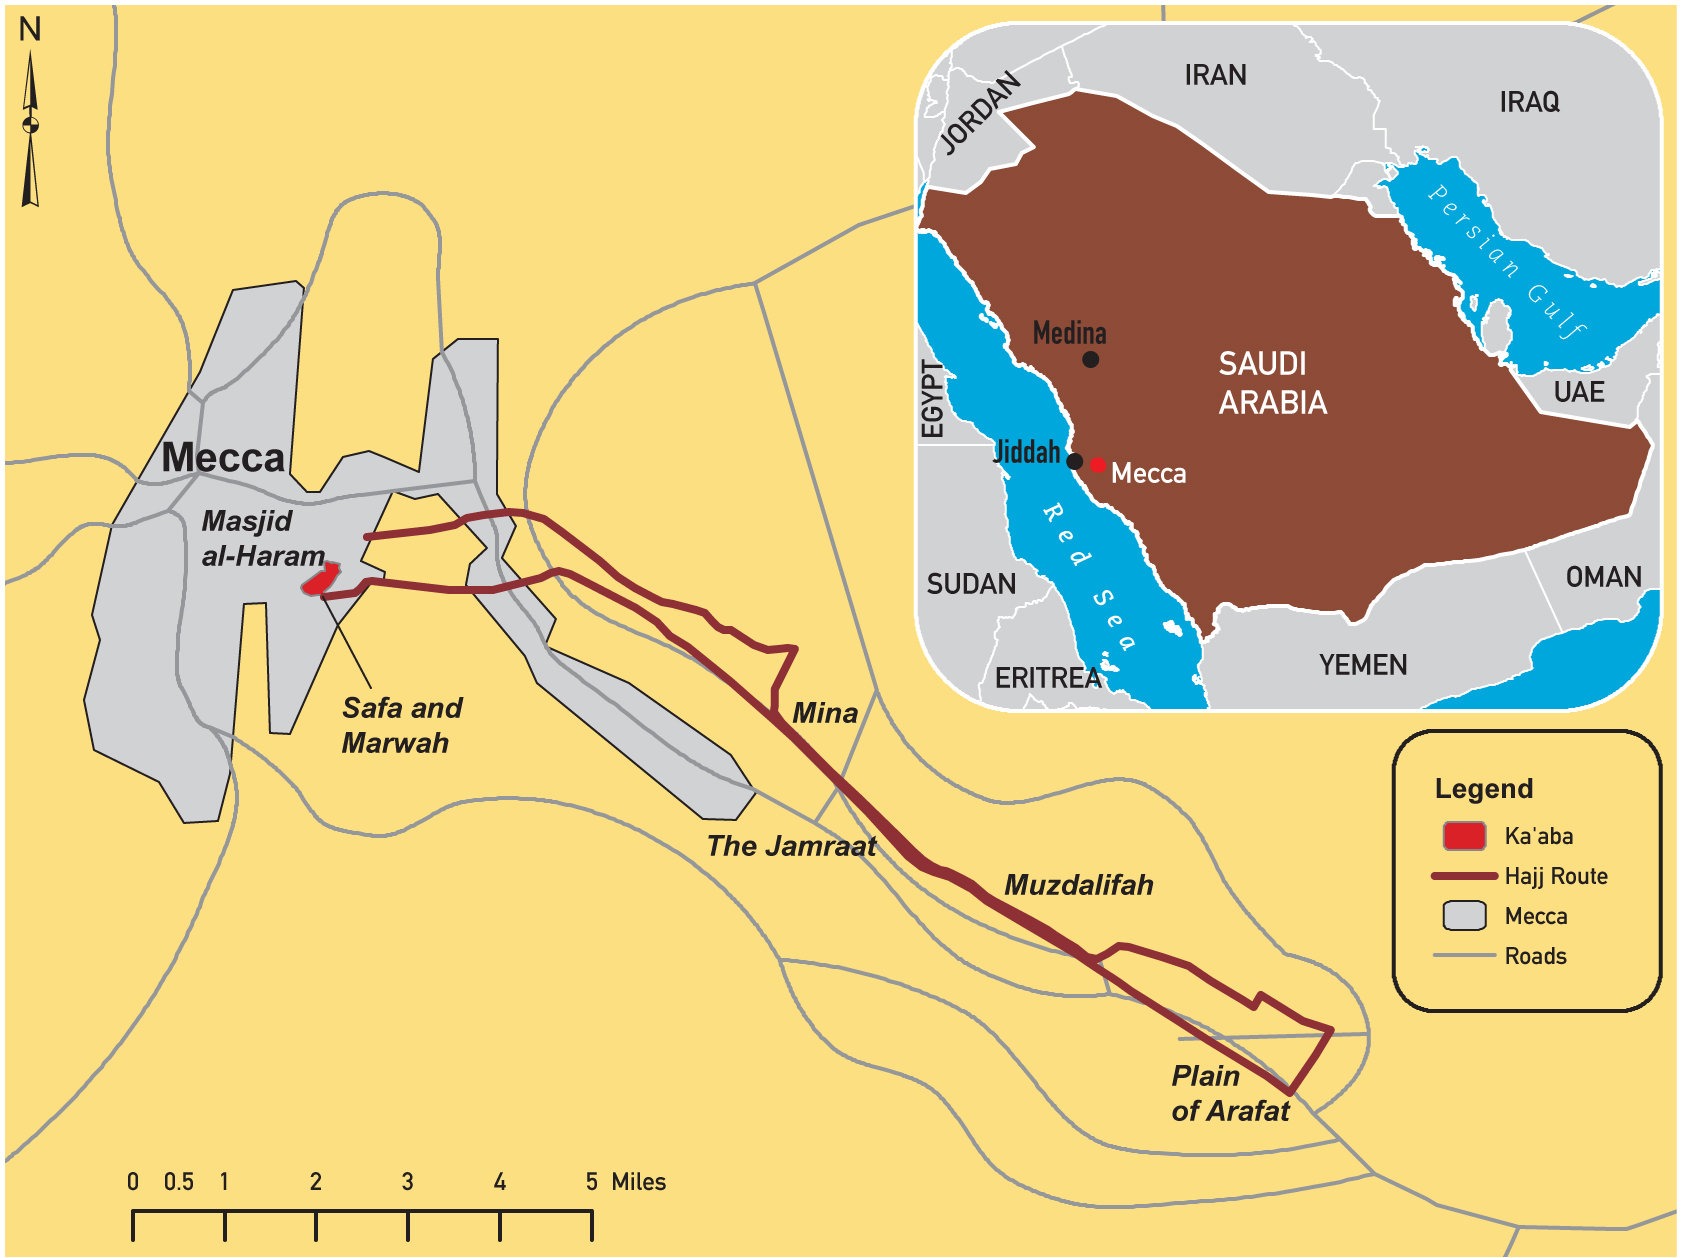 Location of Mecca and the route of the hajj.